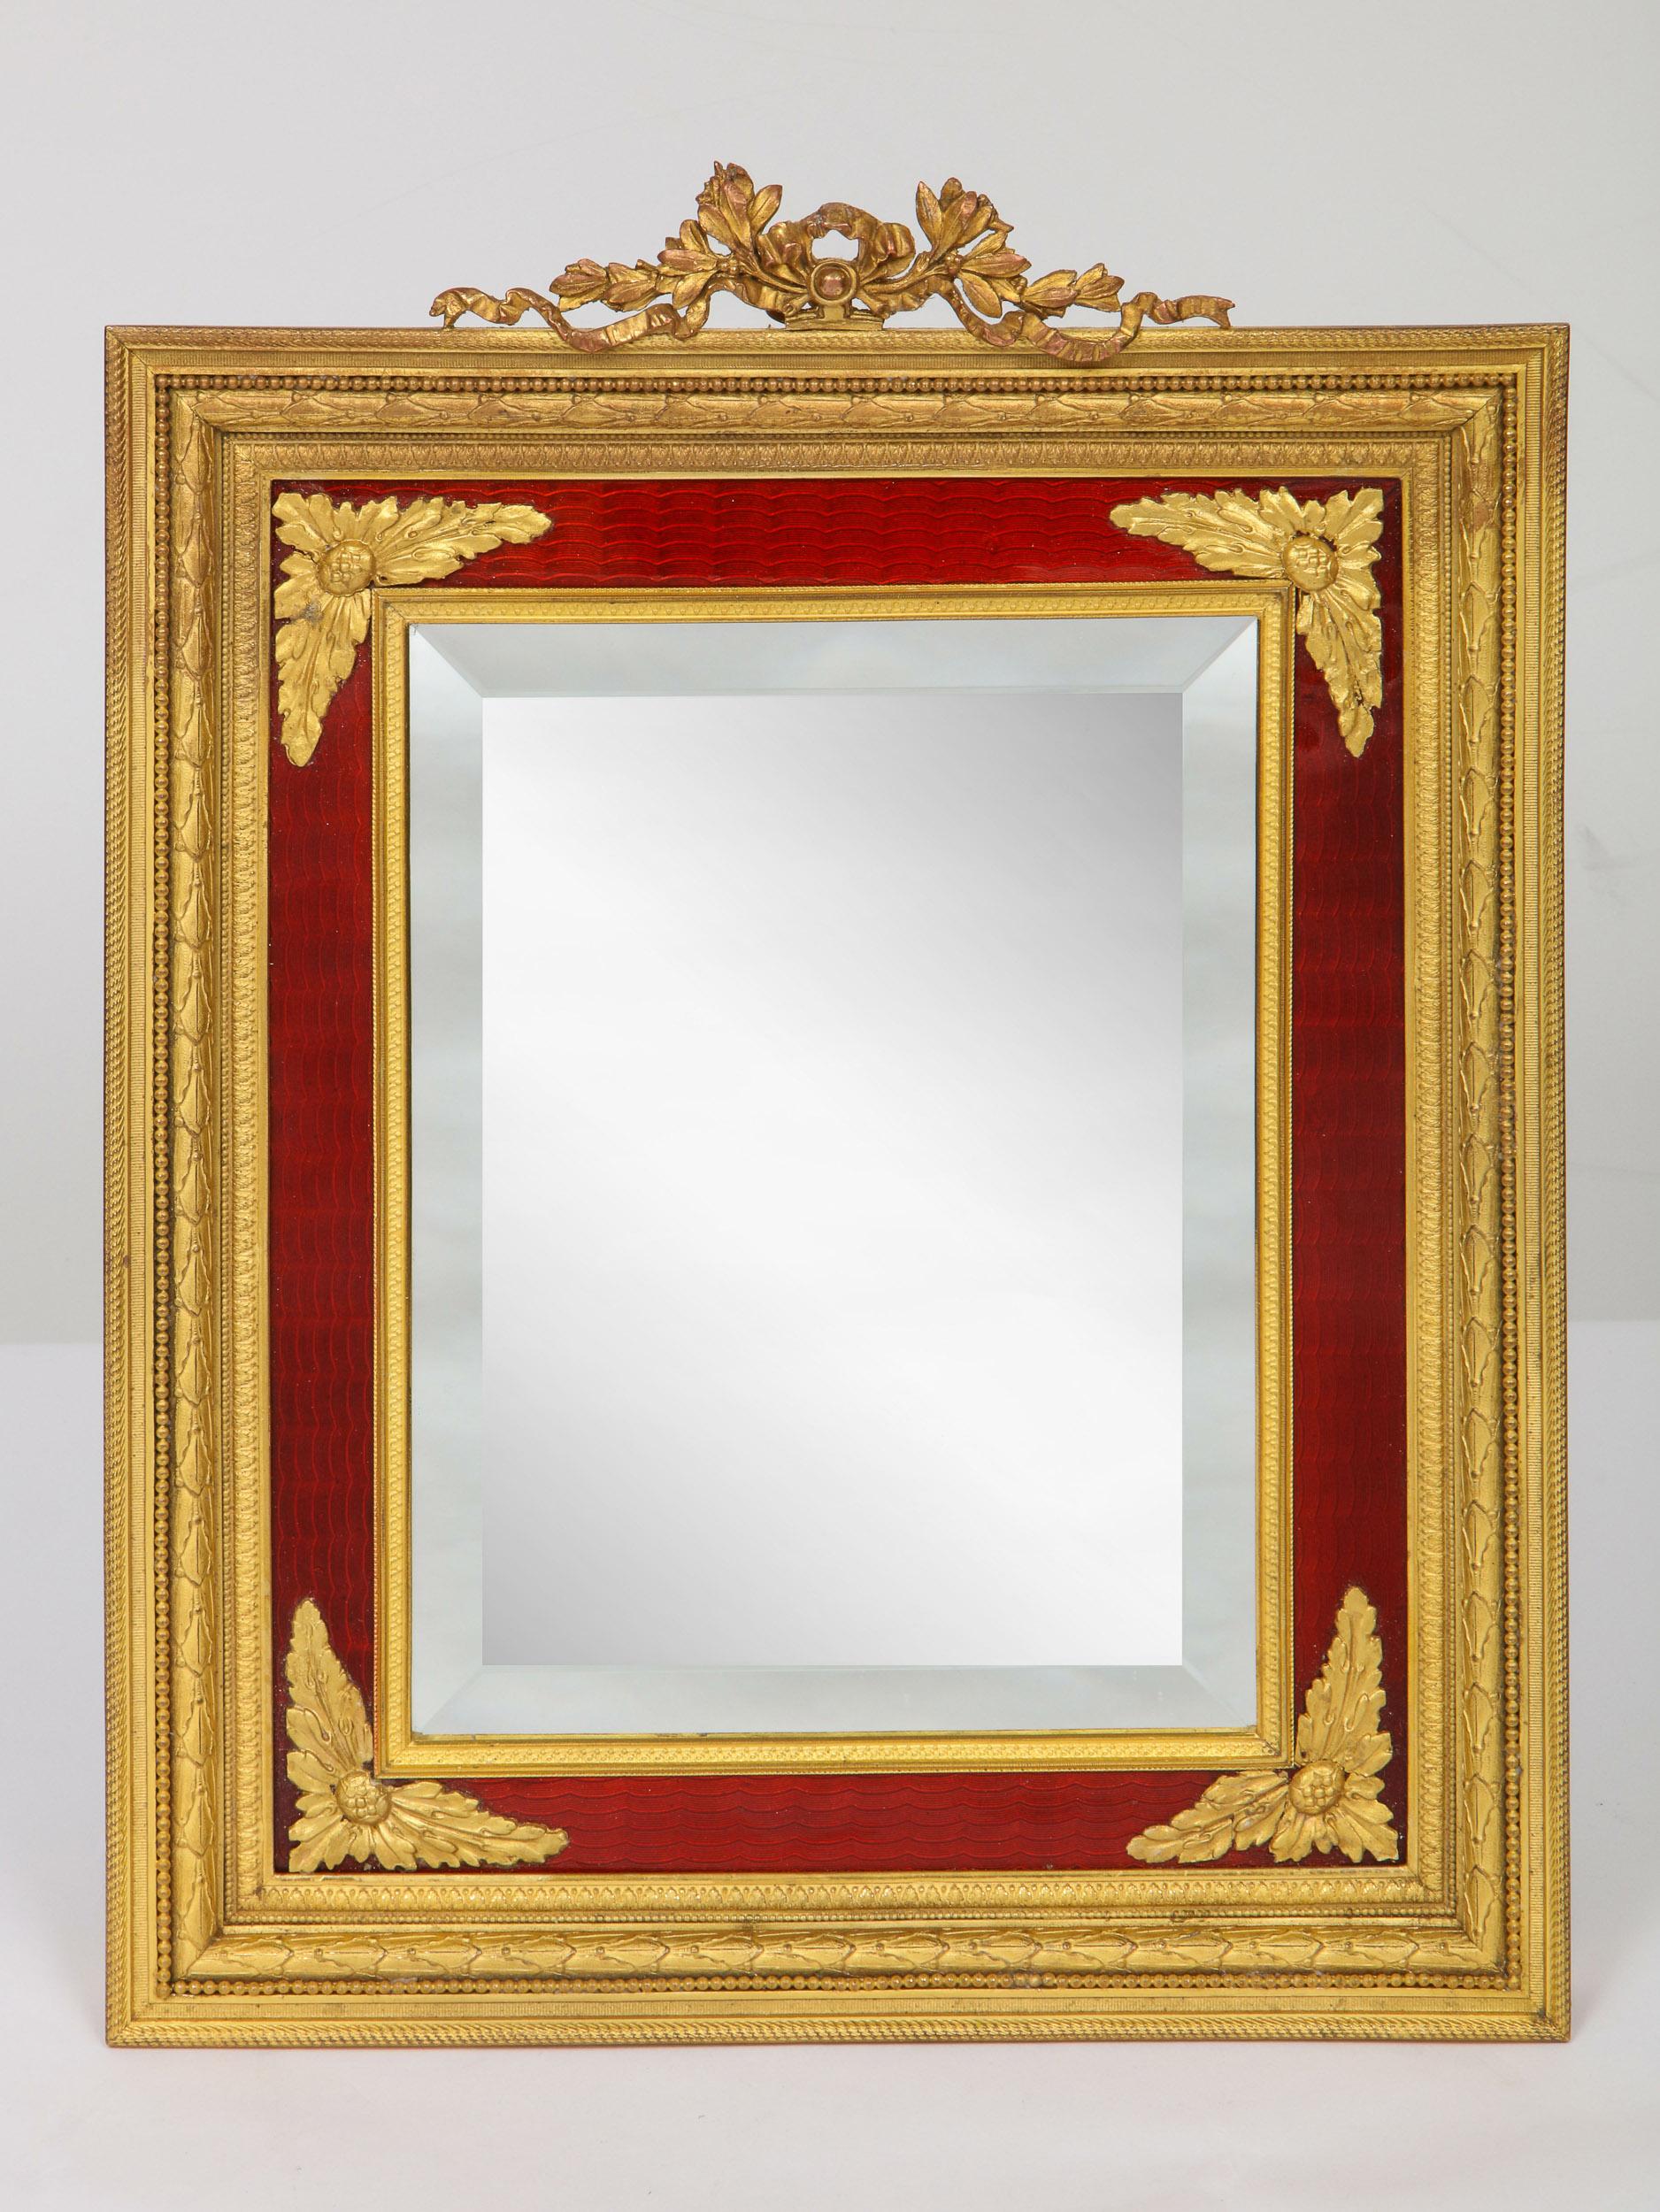 A beautiful, large and elegant French gilt bronze ormolu and red guilloche enamel antique table mirror frame, circa 1895.

Very fine quality.

Measures: 15.5